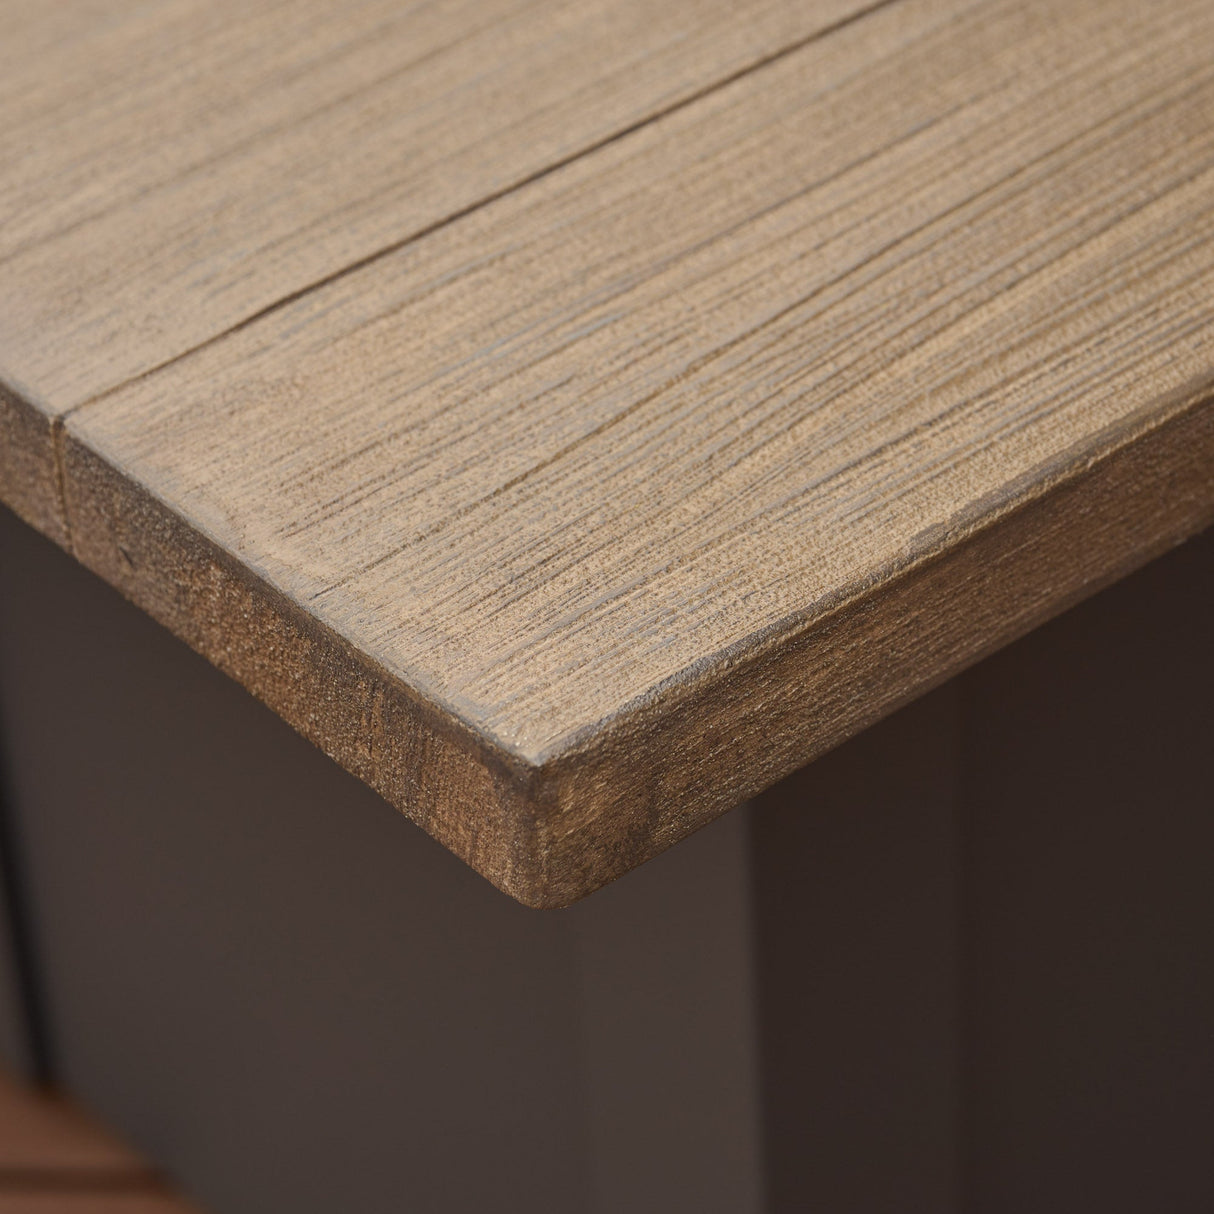 A close up view of the detail found on the Driftwood top on a Havenwood Rectangular Gas Fire Pit Table